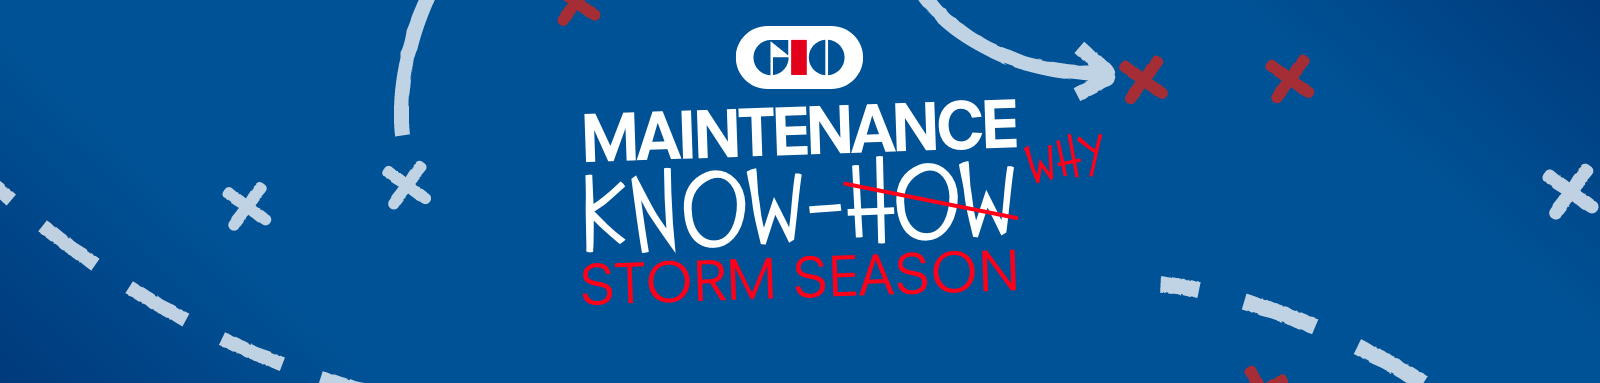 GIO Maintenance Know Why Storm Season banner